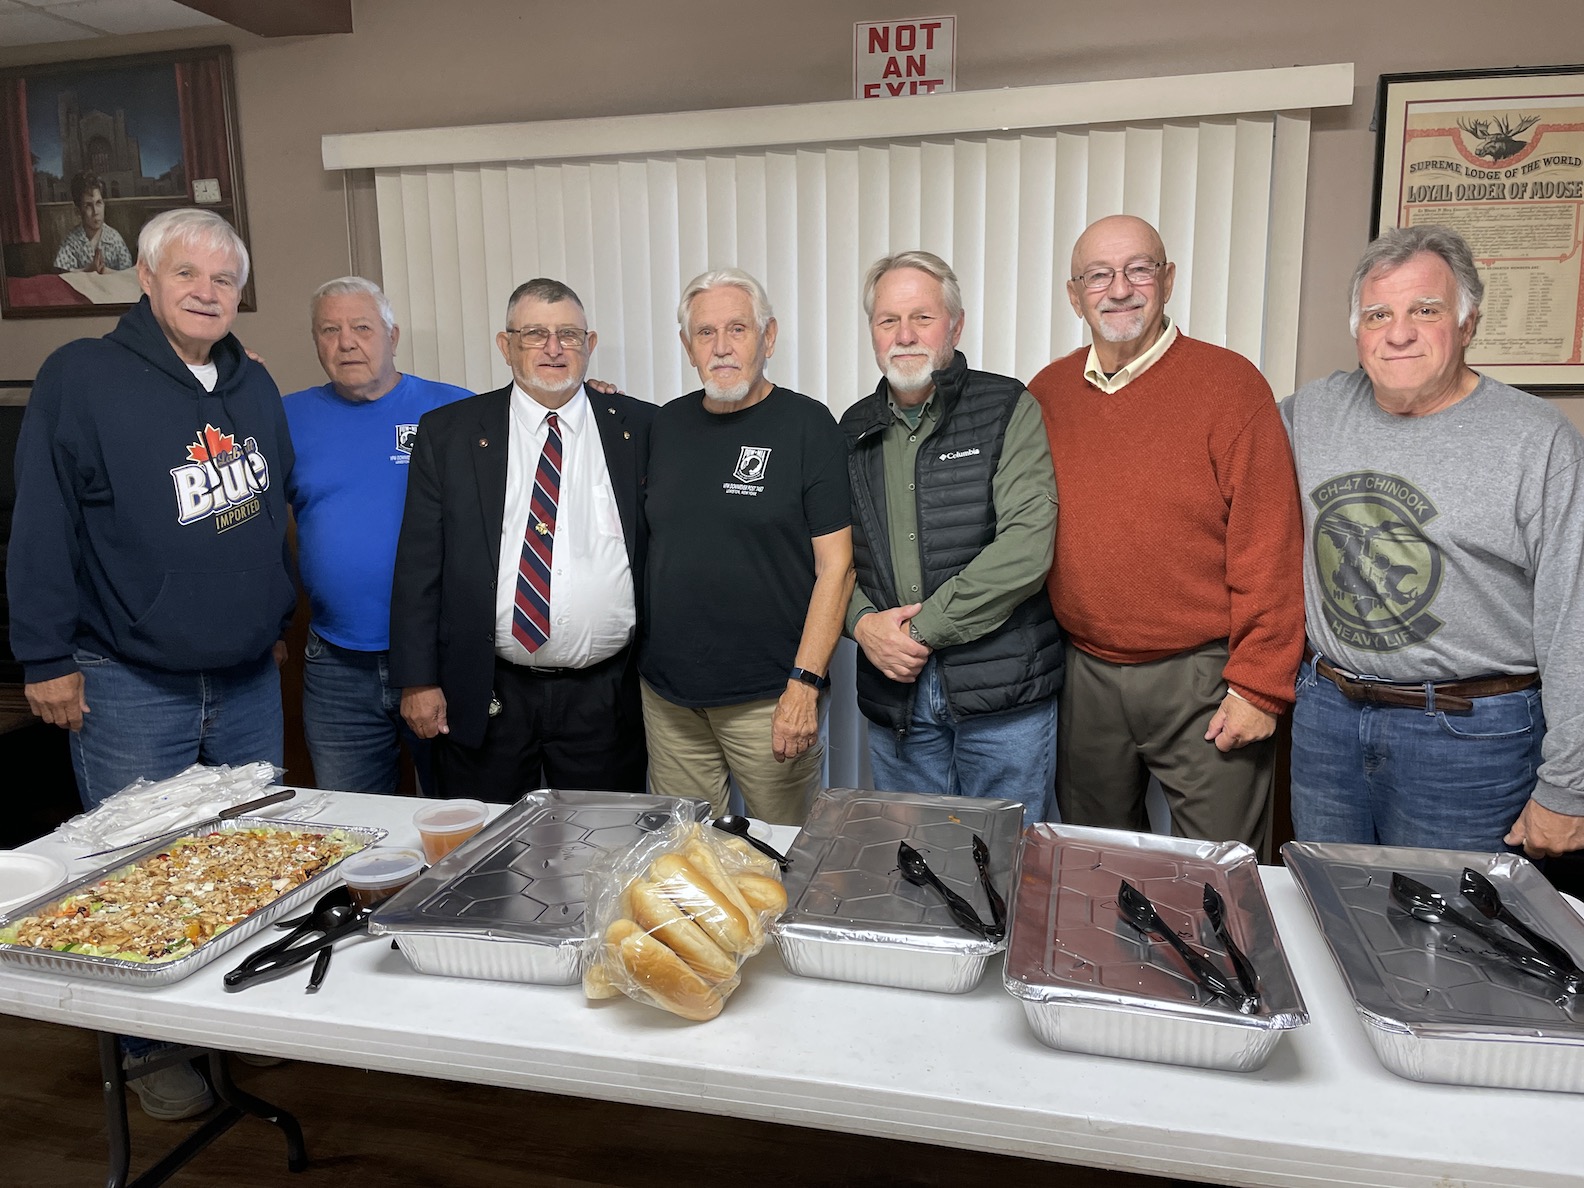 Members of Veterans of Foreign Wars Downriver Post 7487 prepare lunch for their honored guests.